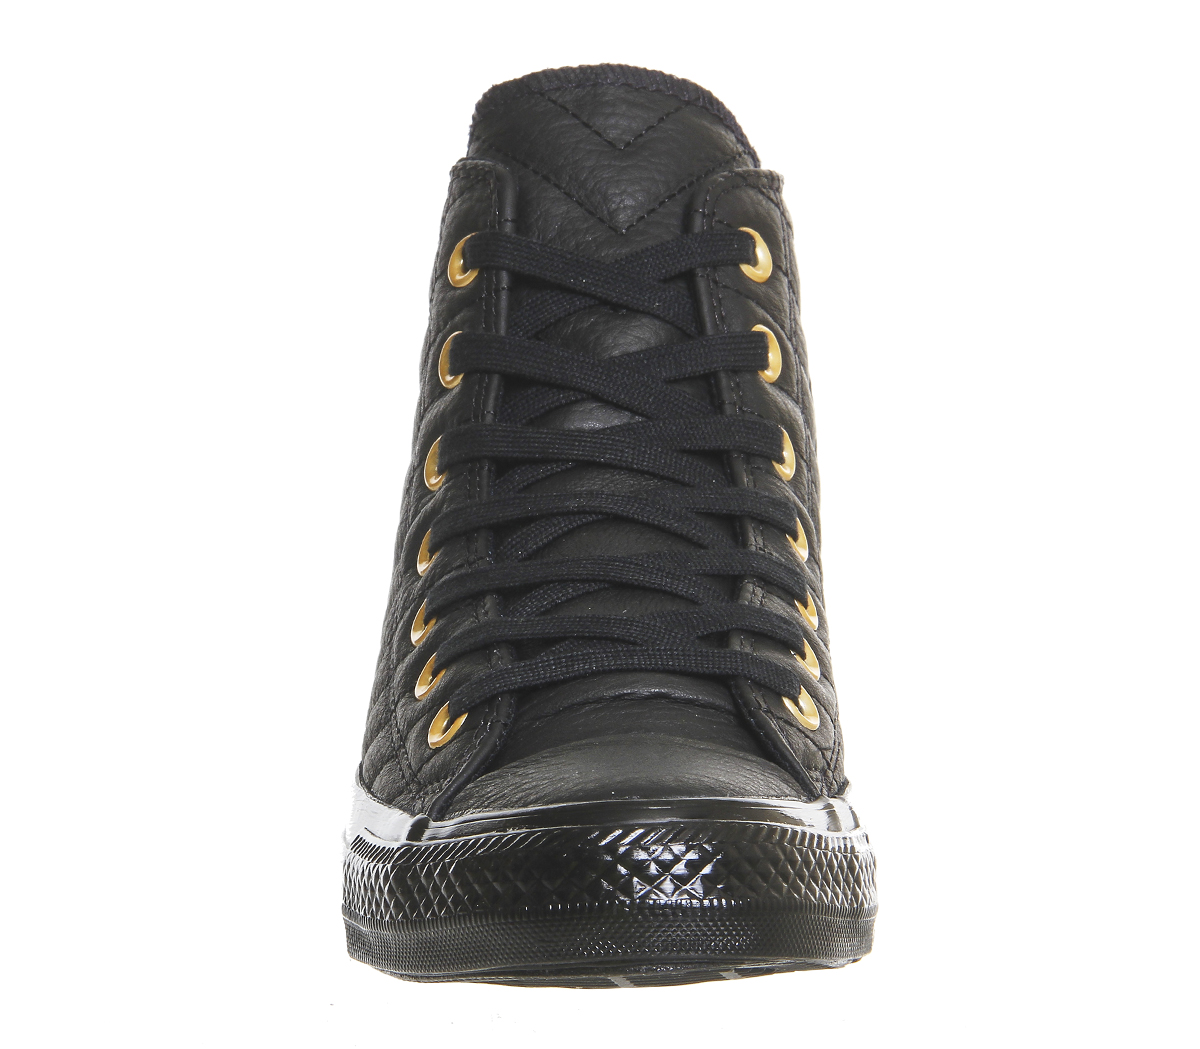 converse all star hi quilted